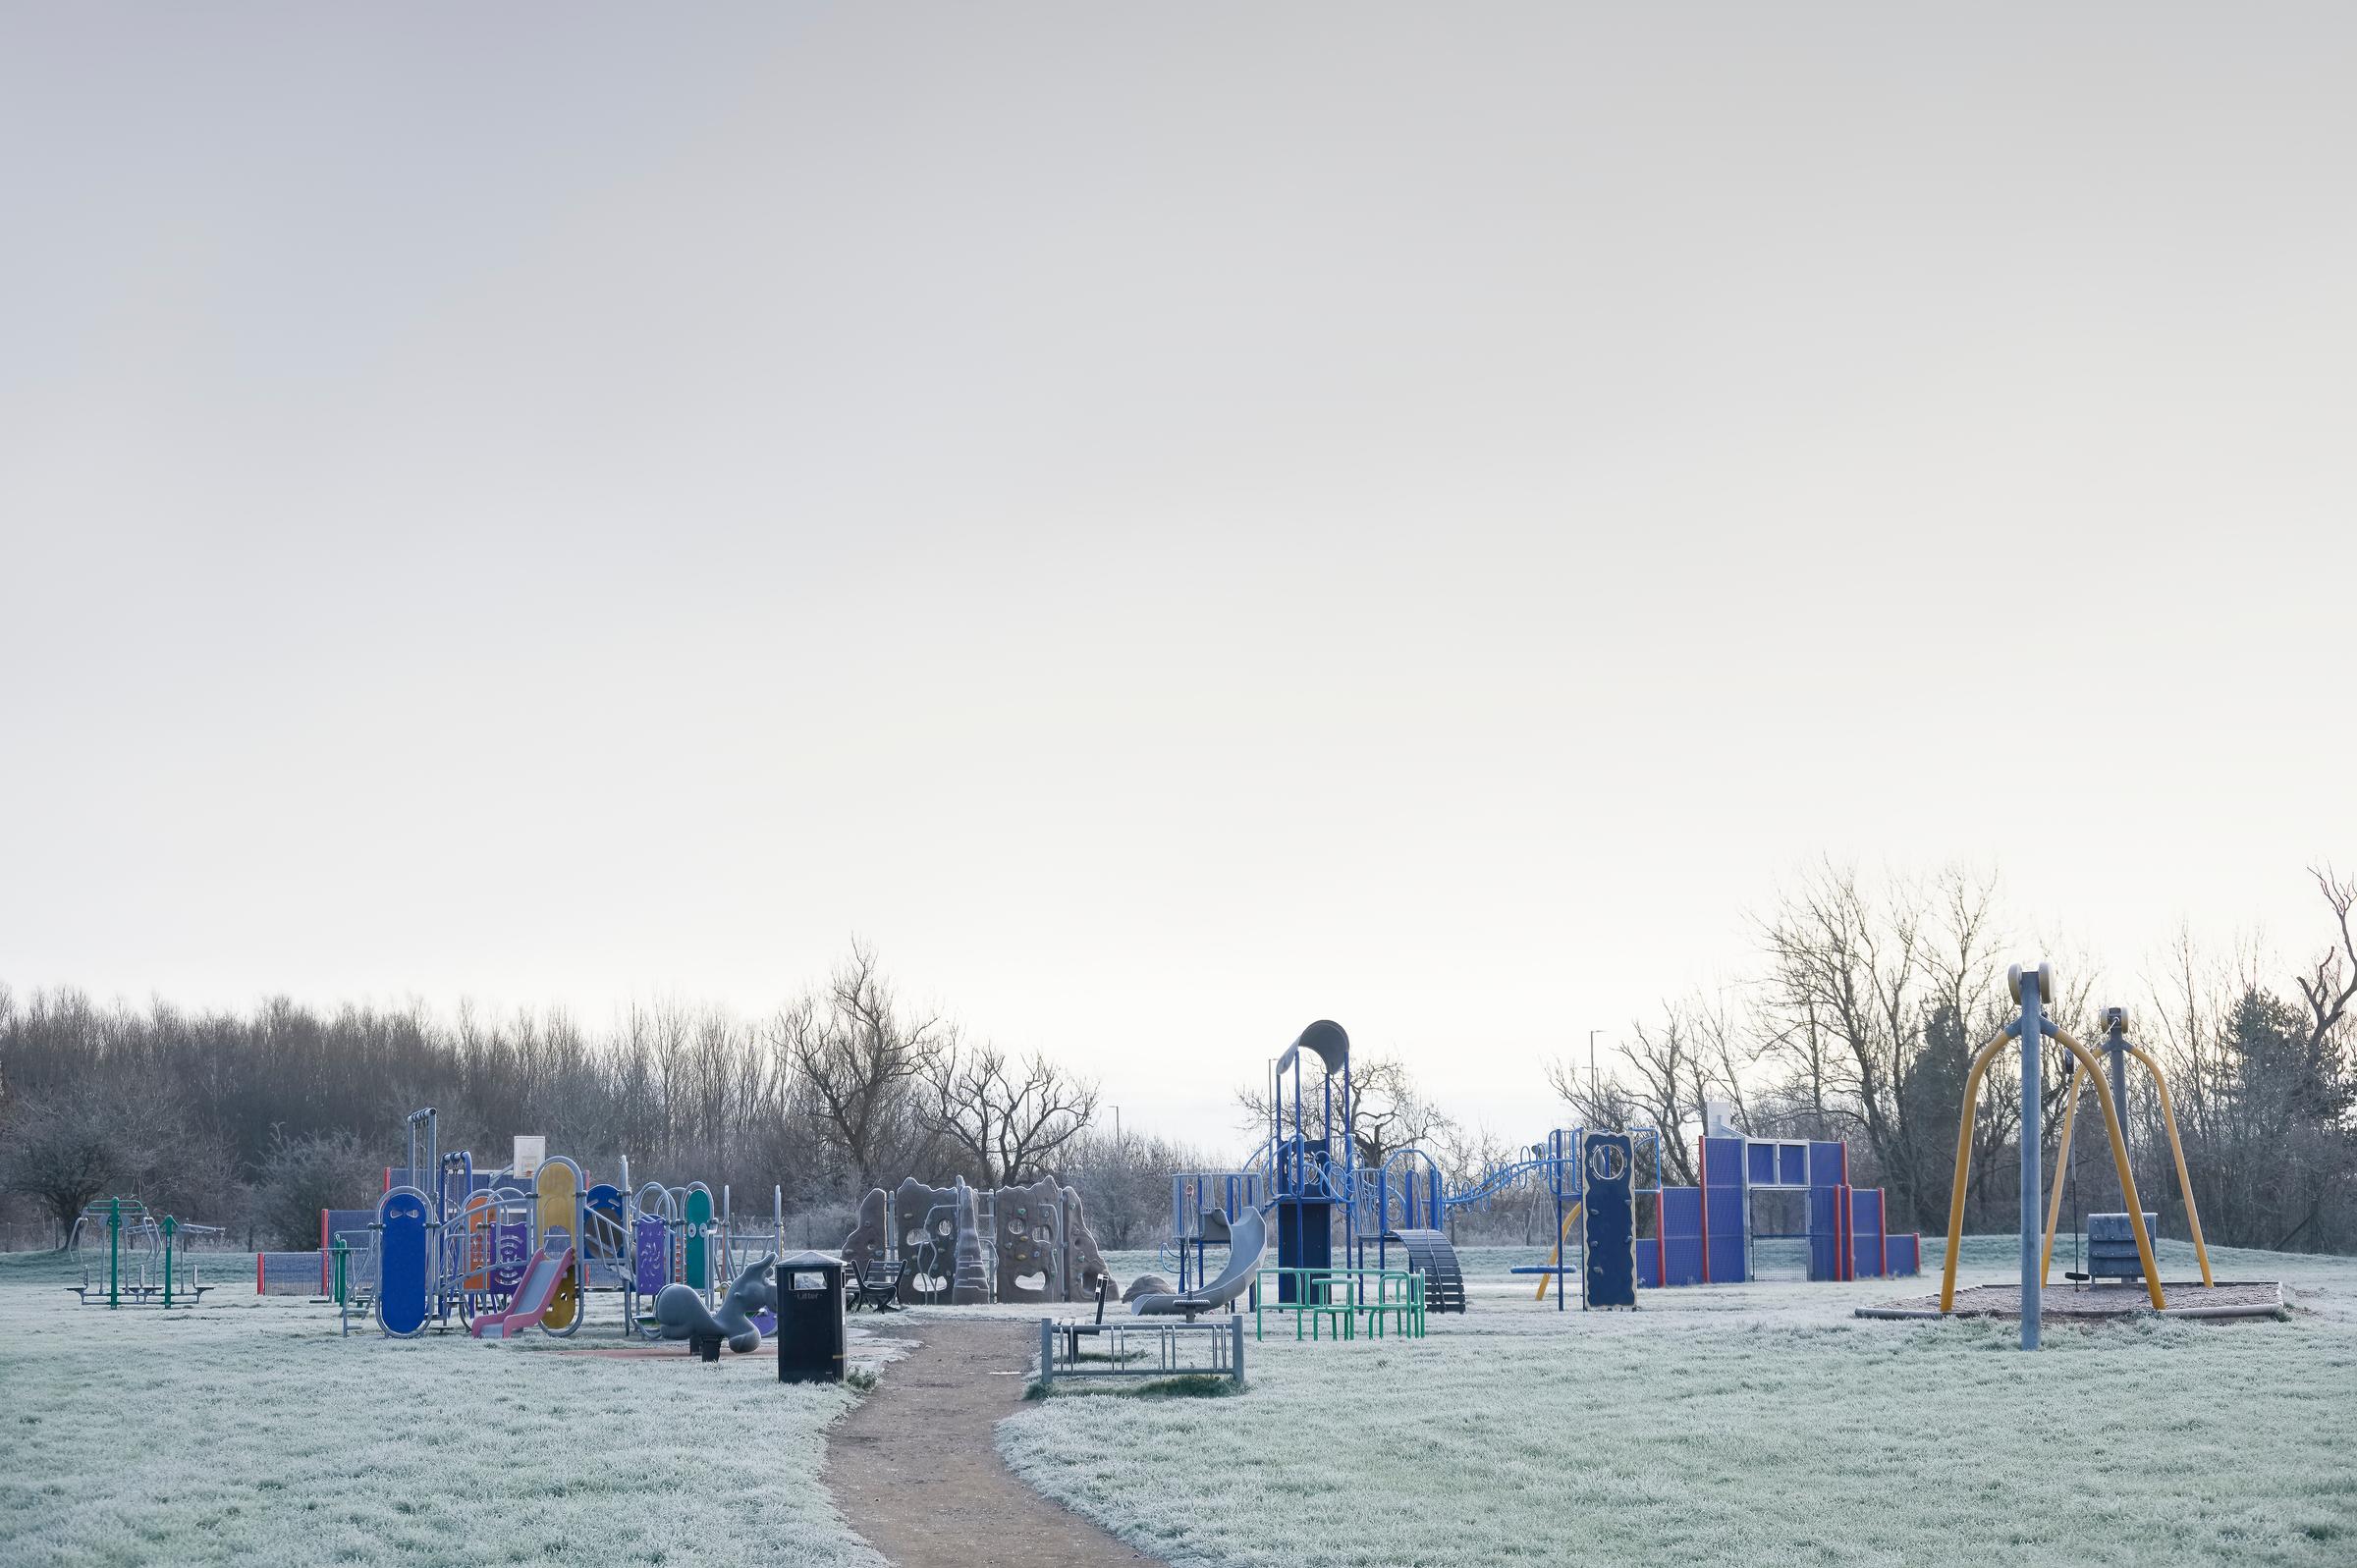 Playground with frozen grass during winter in the UK.